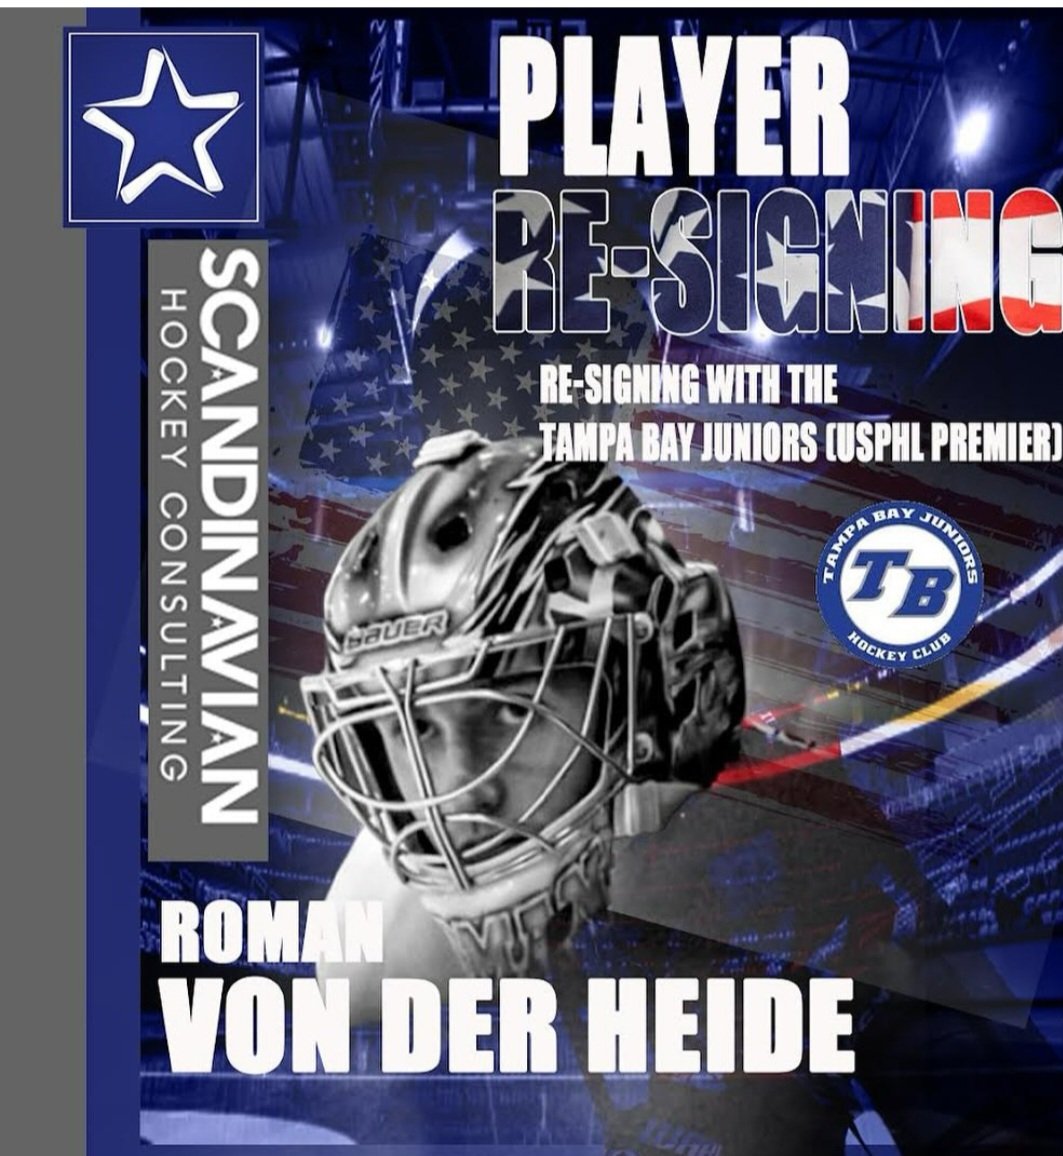 Varmt grattis @goaliervdh and congratulations to @tbjuniorsusphl for signing a great guy! Its going to be great to follow you all in the @USPHL 

#tbj #tampabay #usphl #twittpuck #juniorhockey